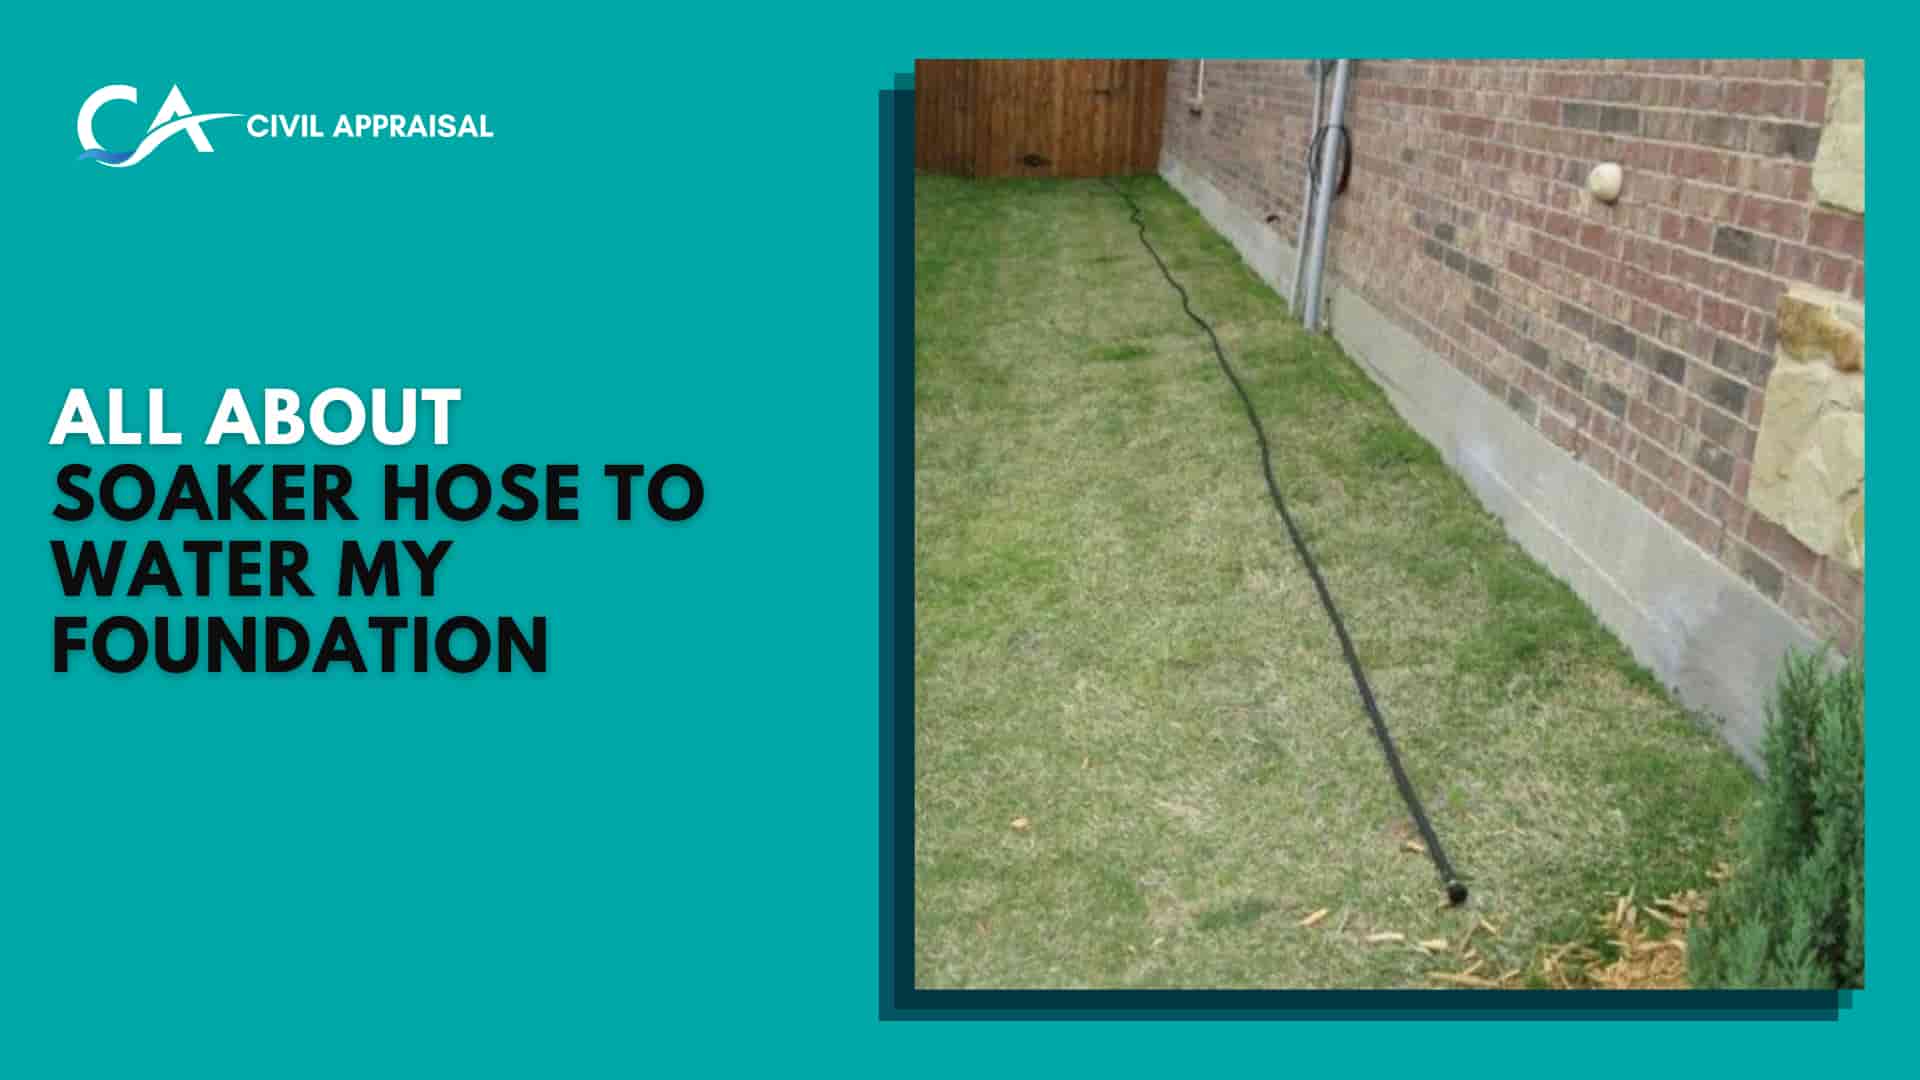 All About Soaker Hose to Water My Foundation | Why Use a Soaker Hose to Water My Foundation | How to Use a Soaker Hose to Water Your Foundation - Civil Appraisal